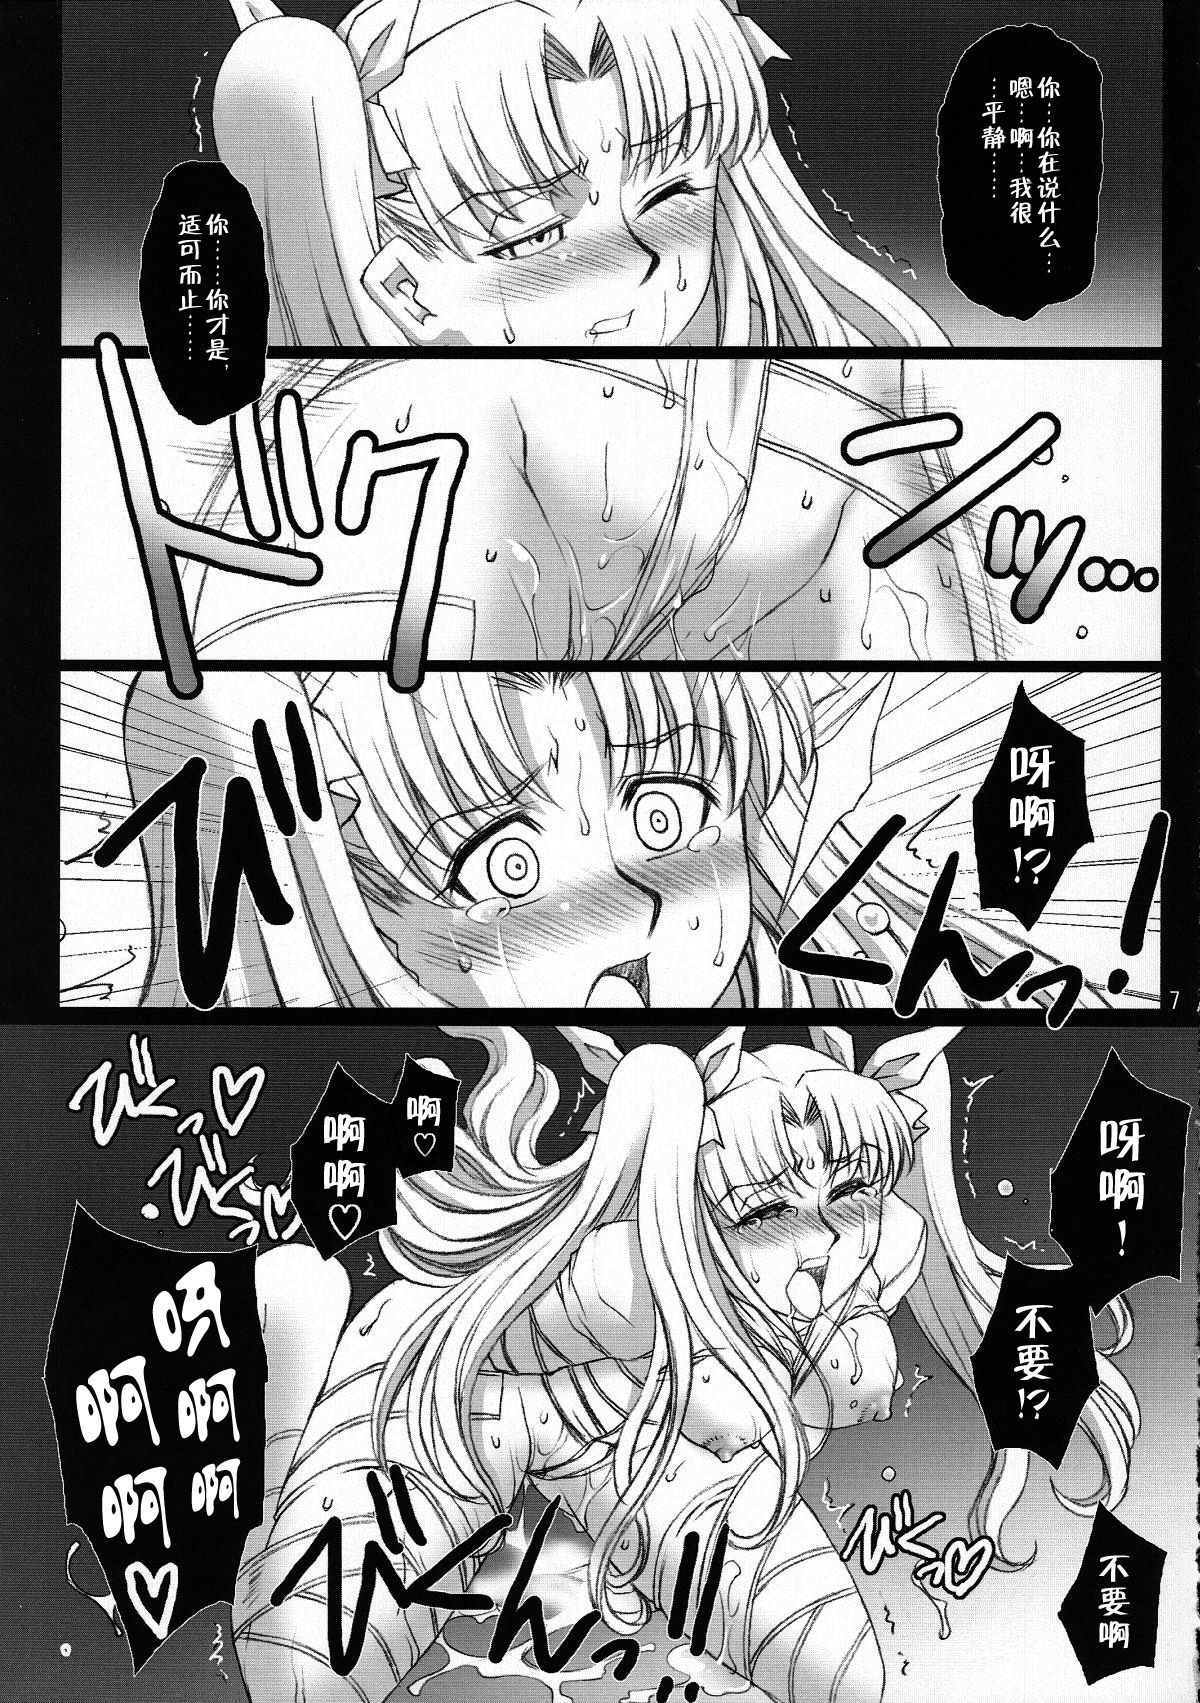 (COMIC1☆2) [H.B (B-RIVER)] Red Degeneration -DAY/3- (Fate/stay night) [Chinese] [不咕鸟汉化组] page 6 full